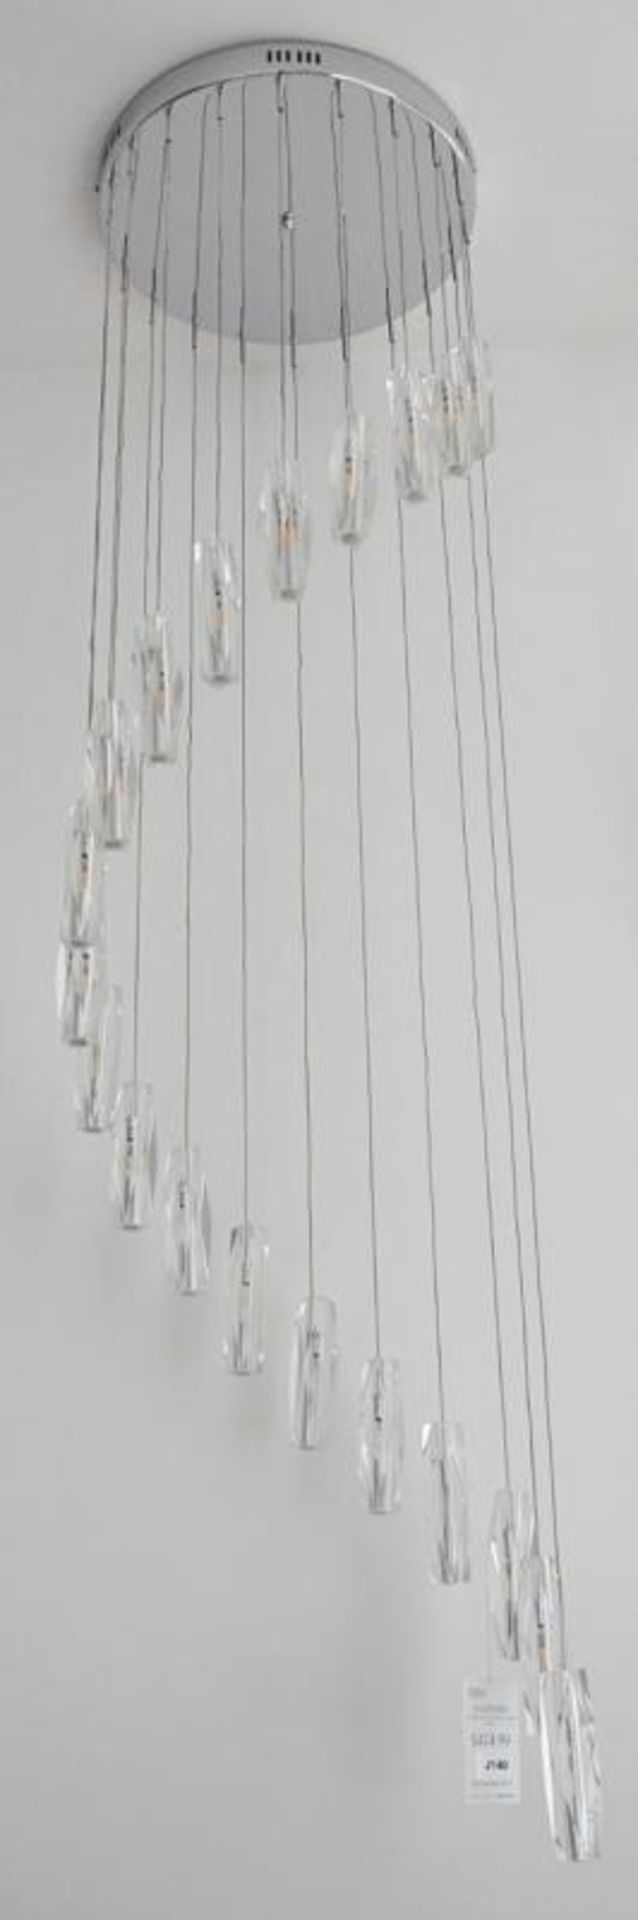 1 x Sculptured Ice Chrome 20 Light Dingle Dangle Pendant With Crystal Glass - Ex Display Stock - CL2 - Image 4 of 6